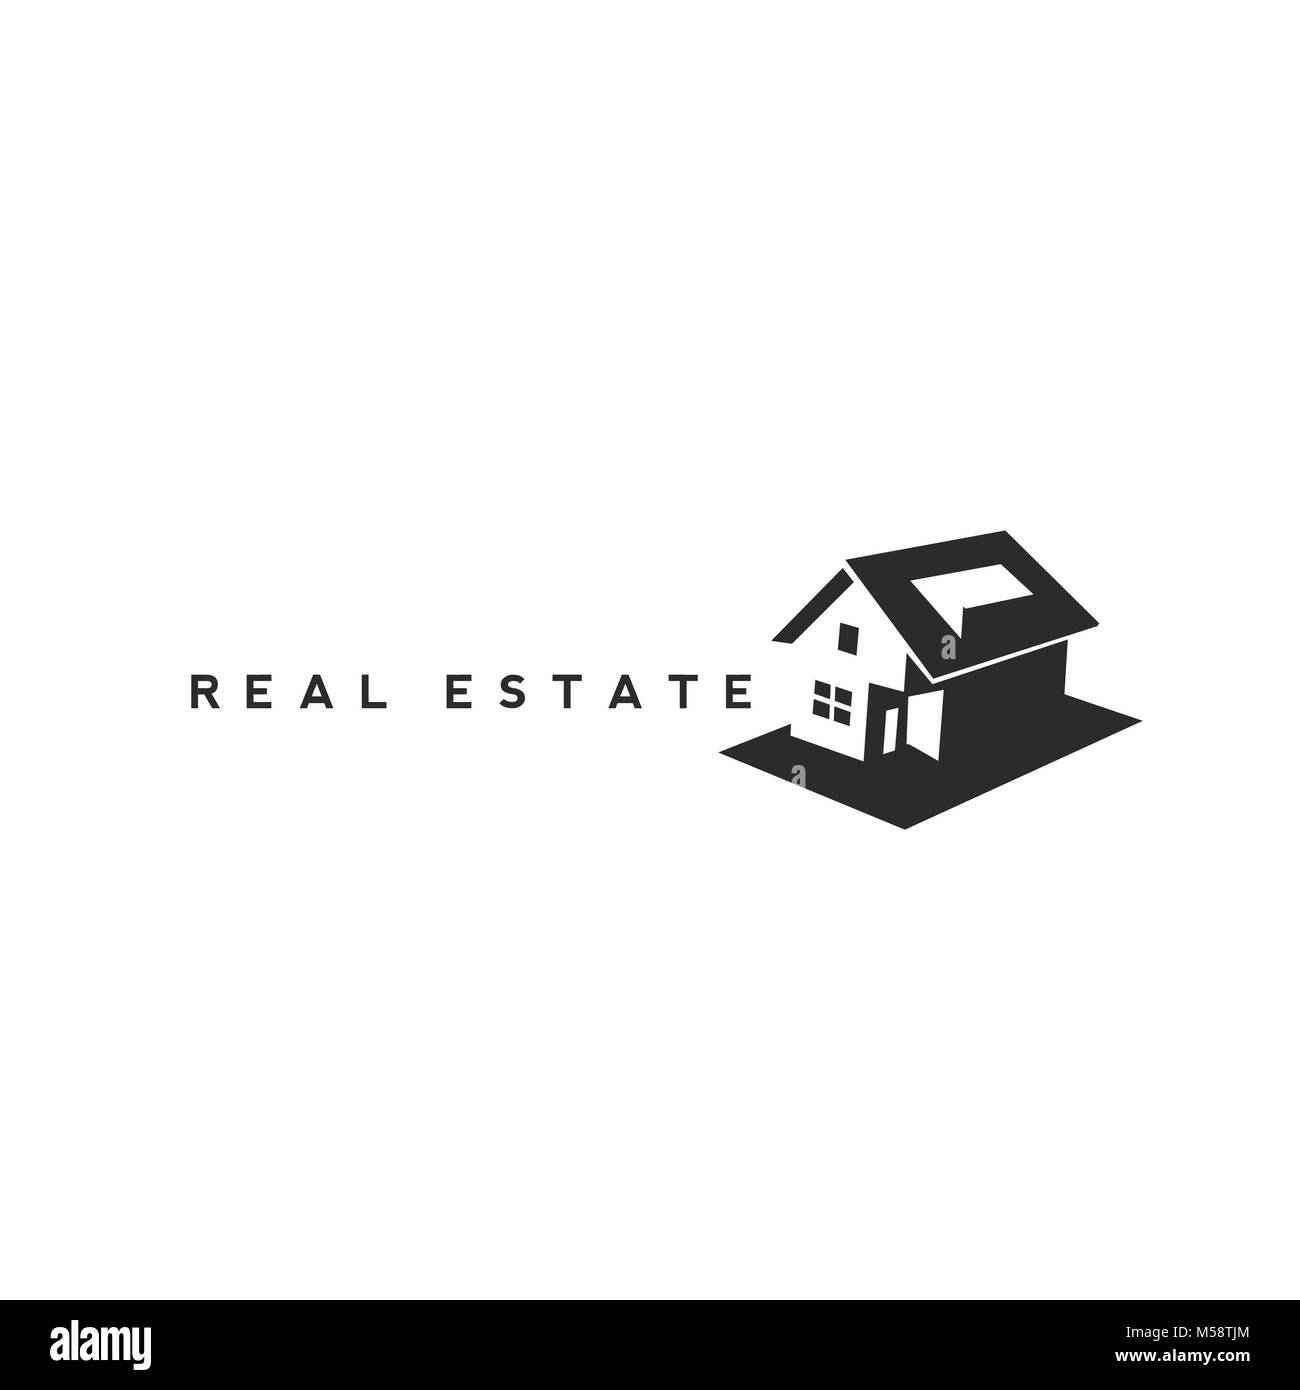 real estate logo with vector illustration. Stock Vector